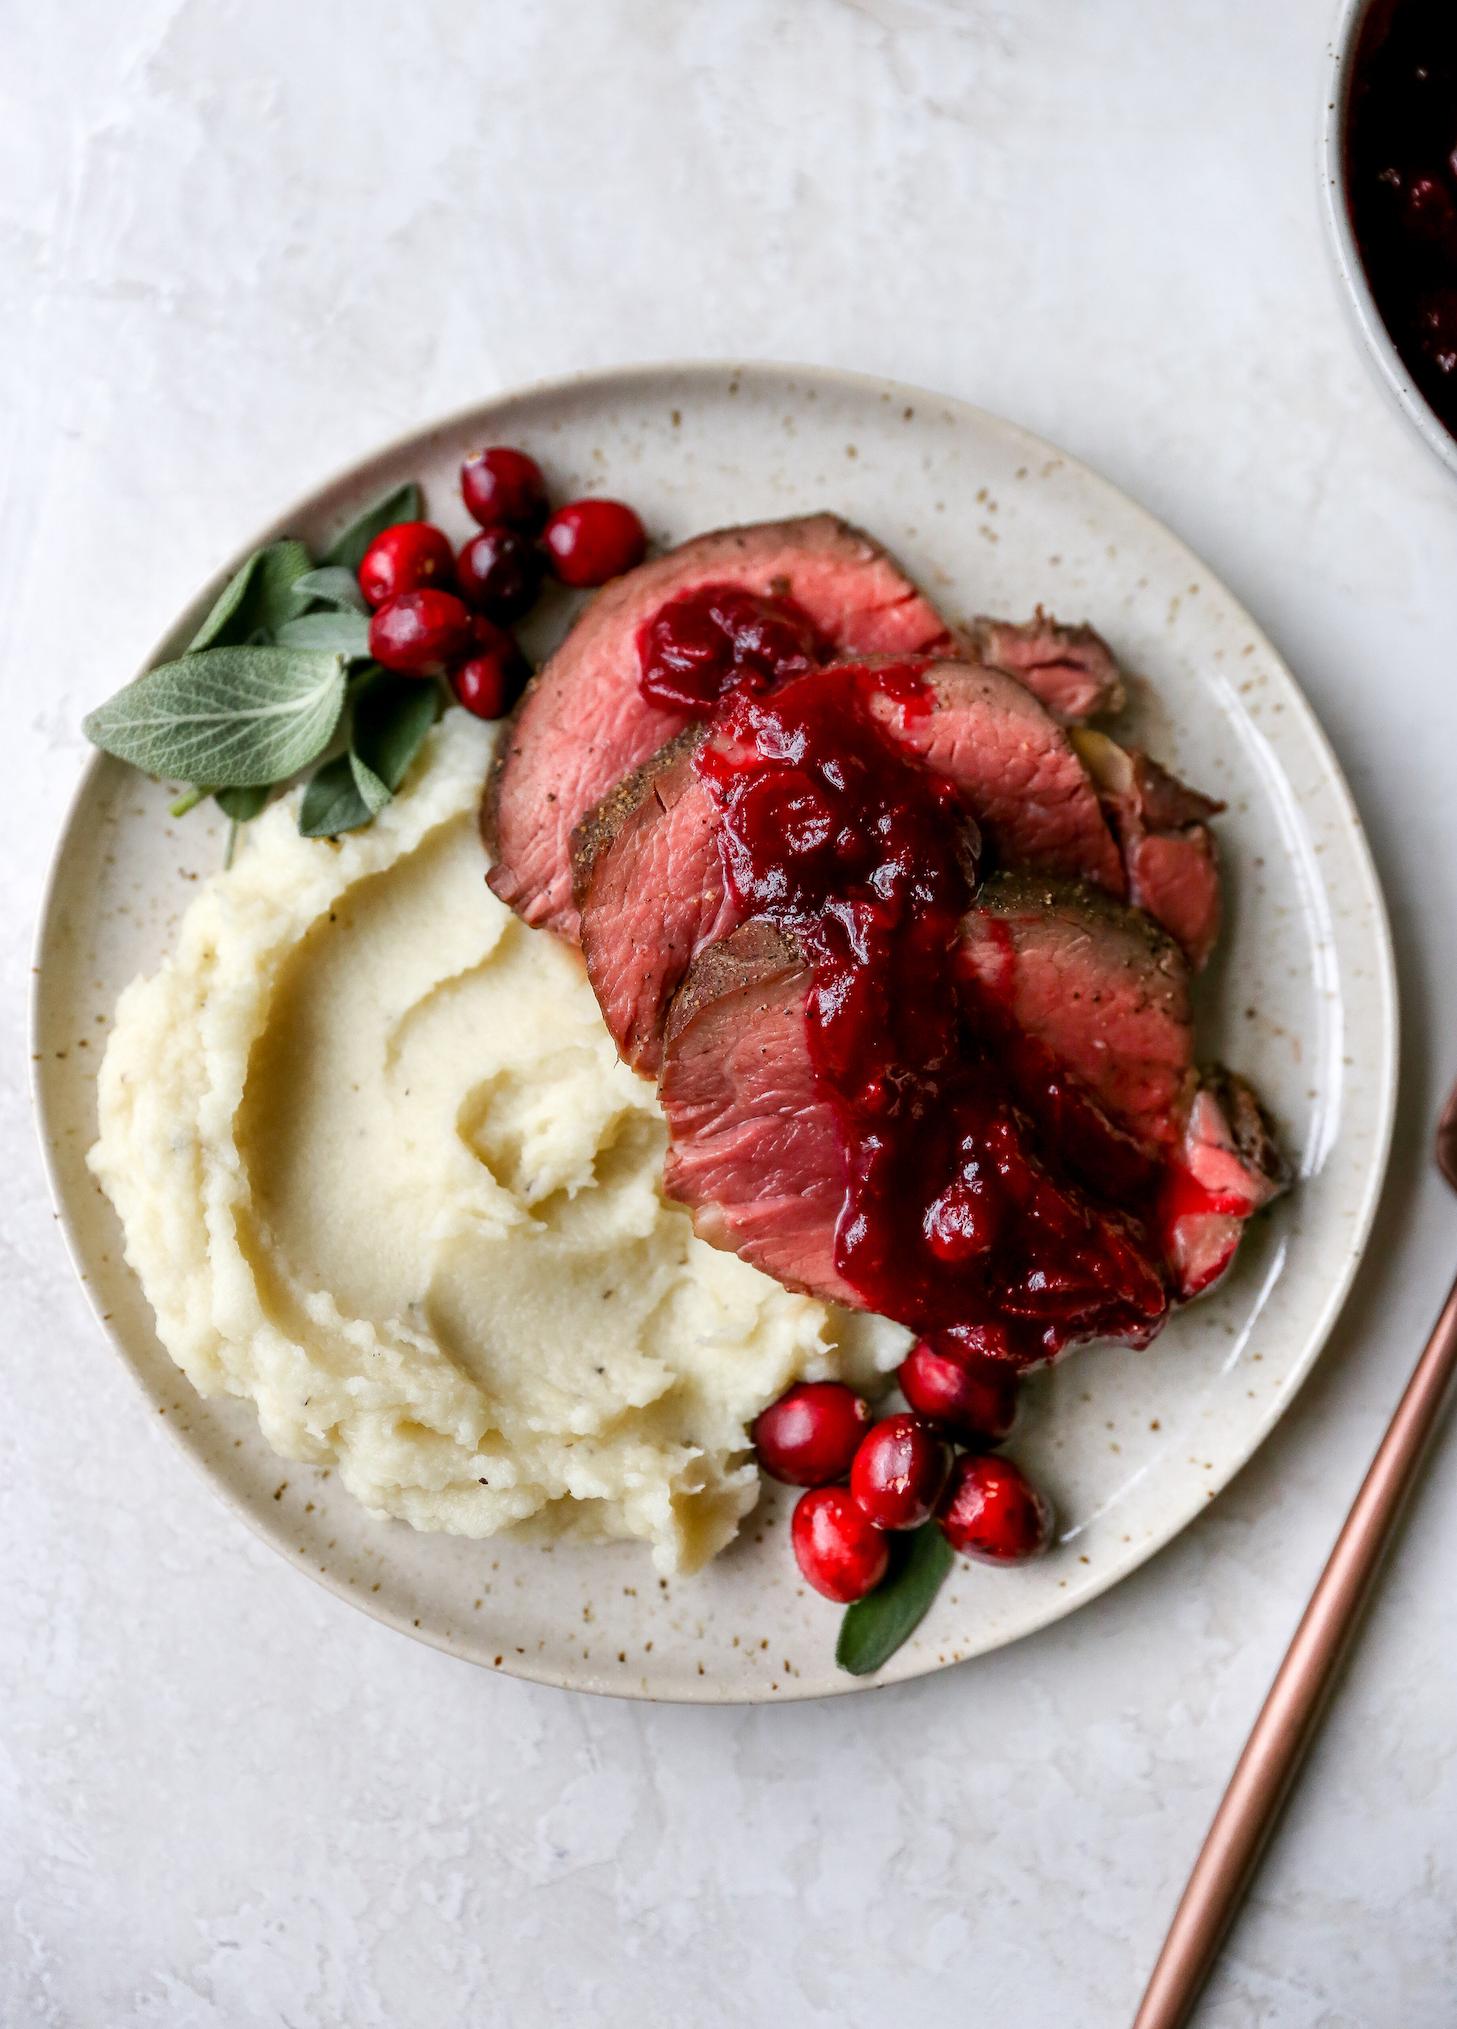  Impress your friends with this elegant beef dish!